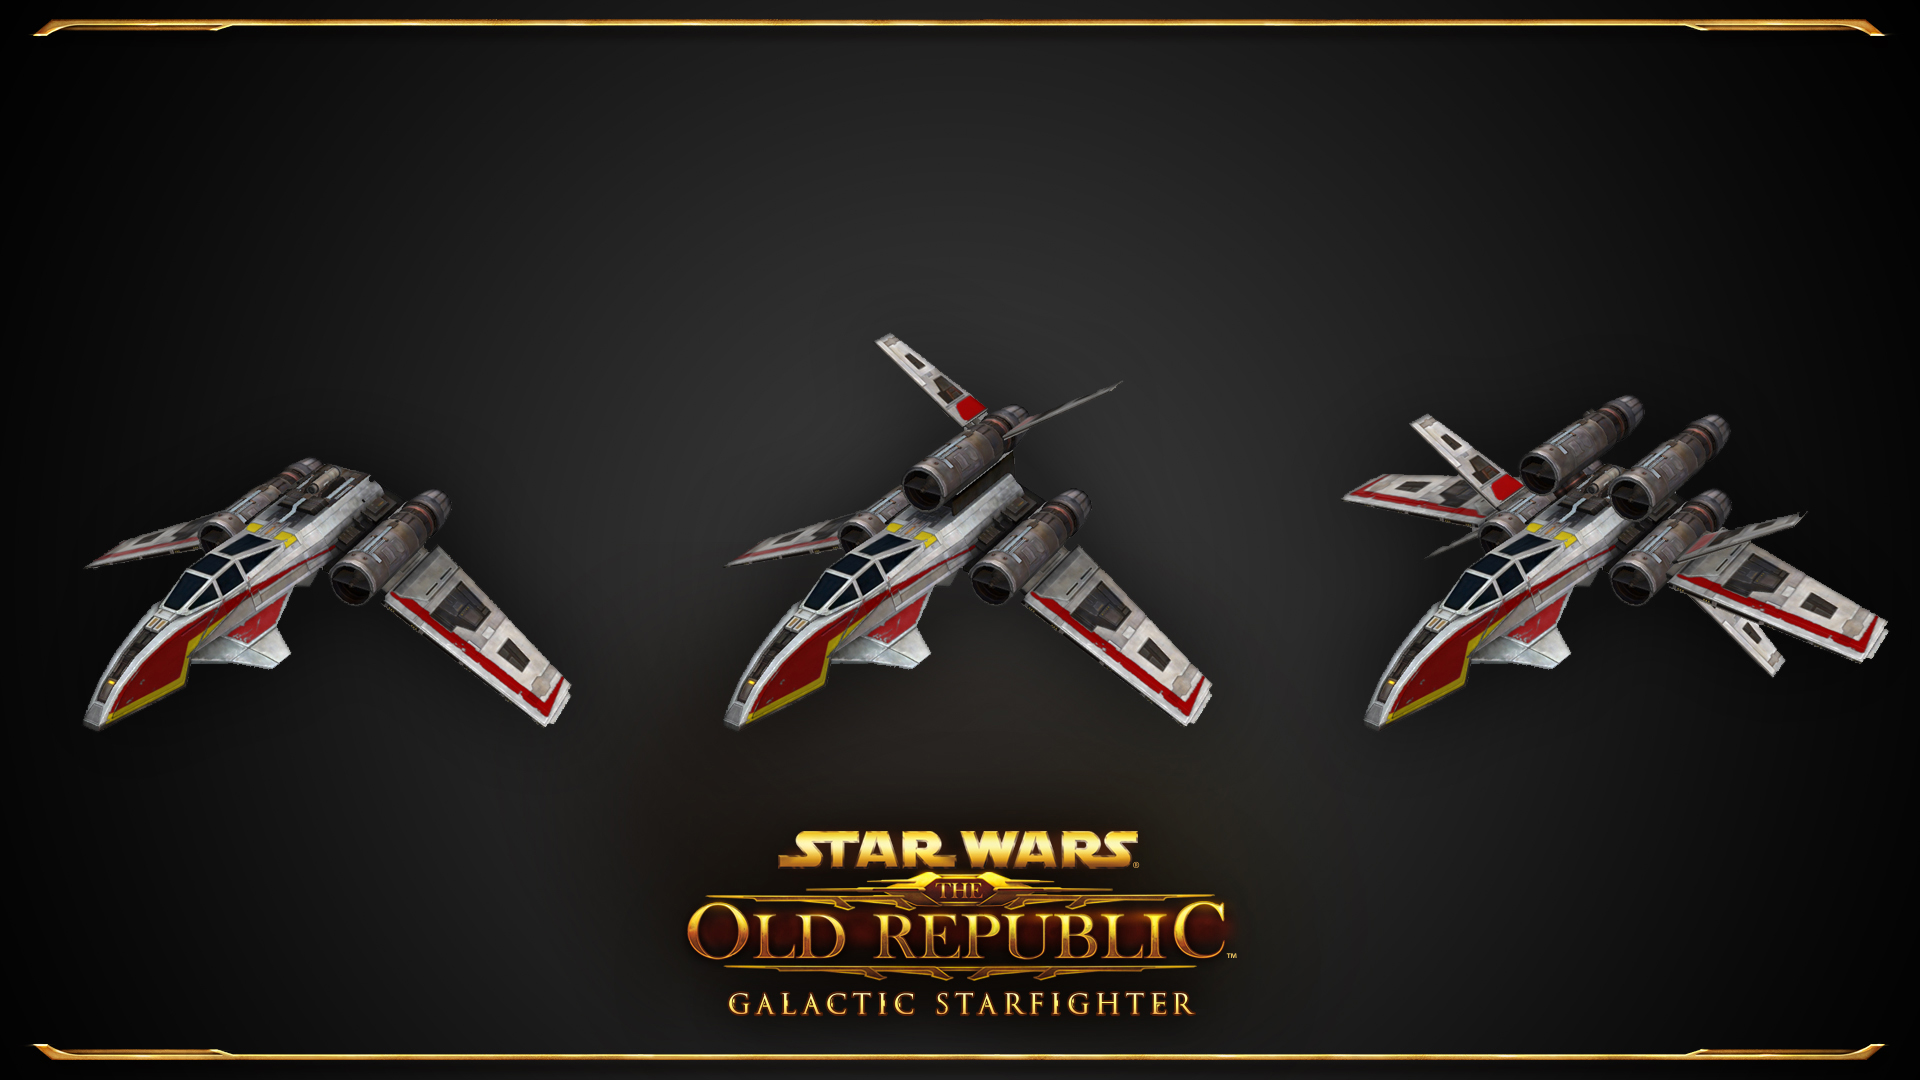 Star Wars: The Old Republic Starfighter (2013) promotional art